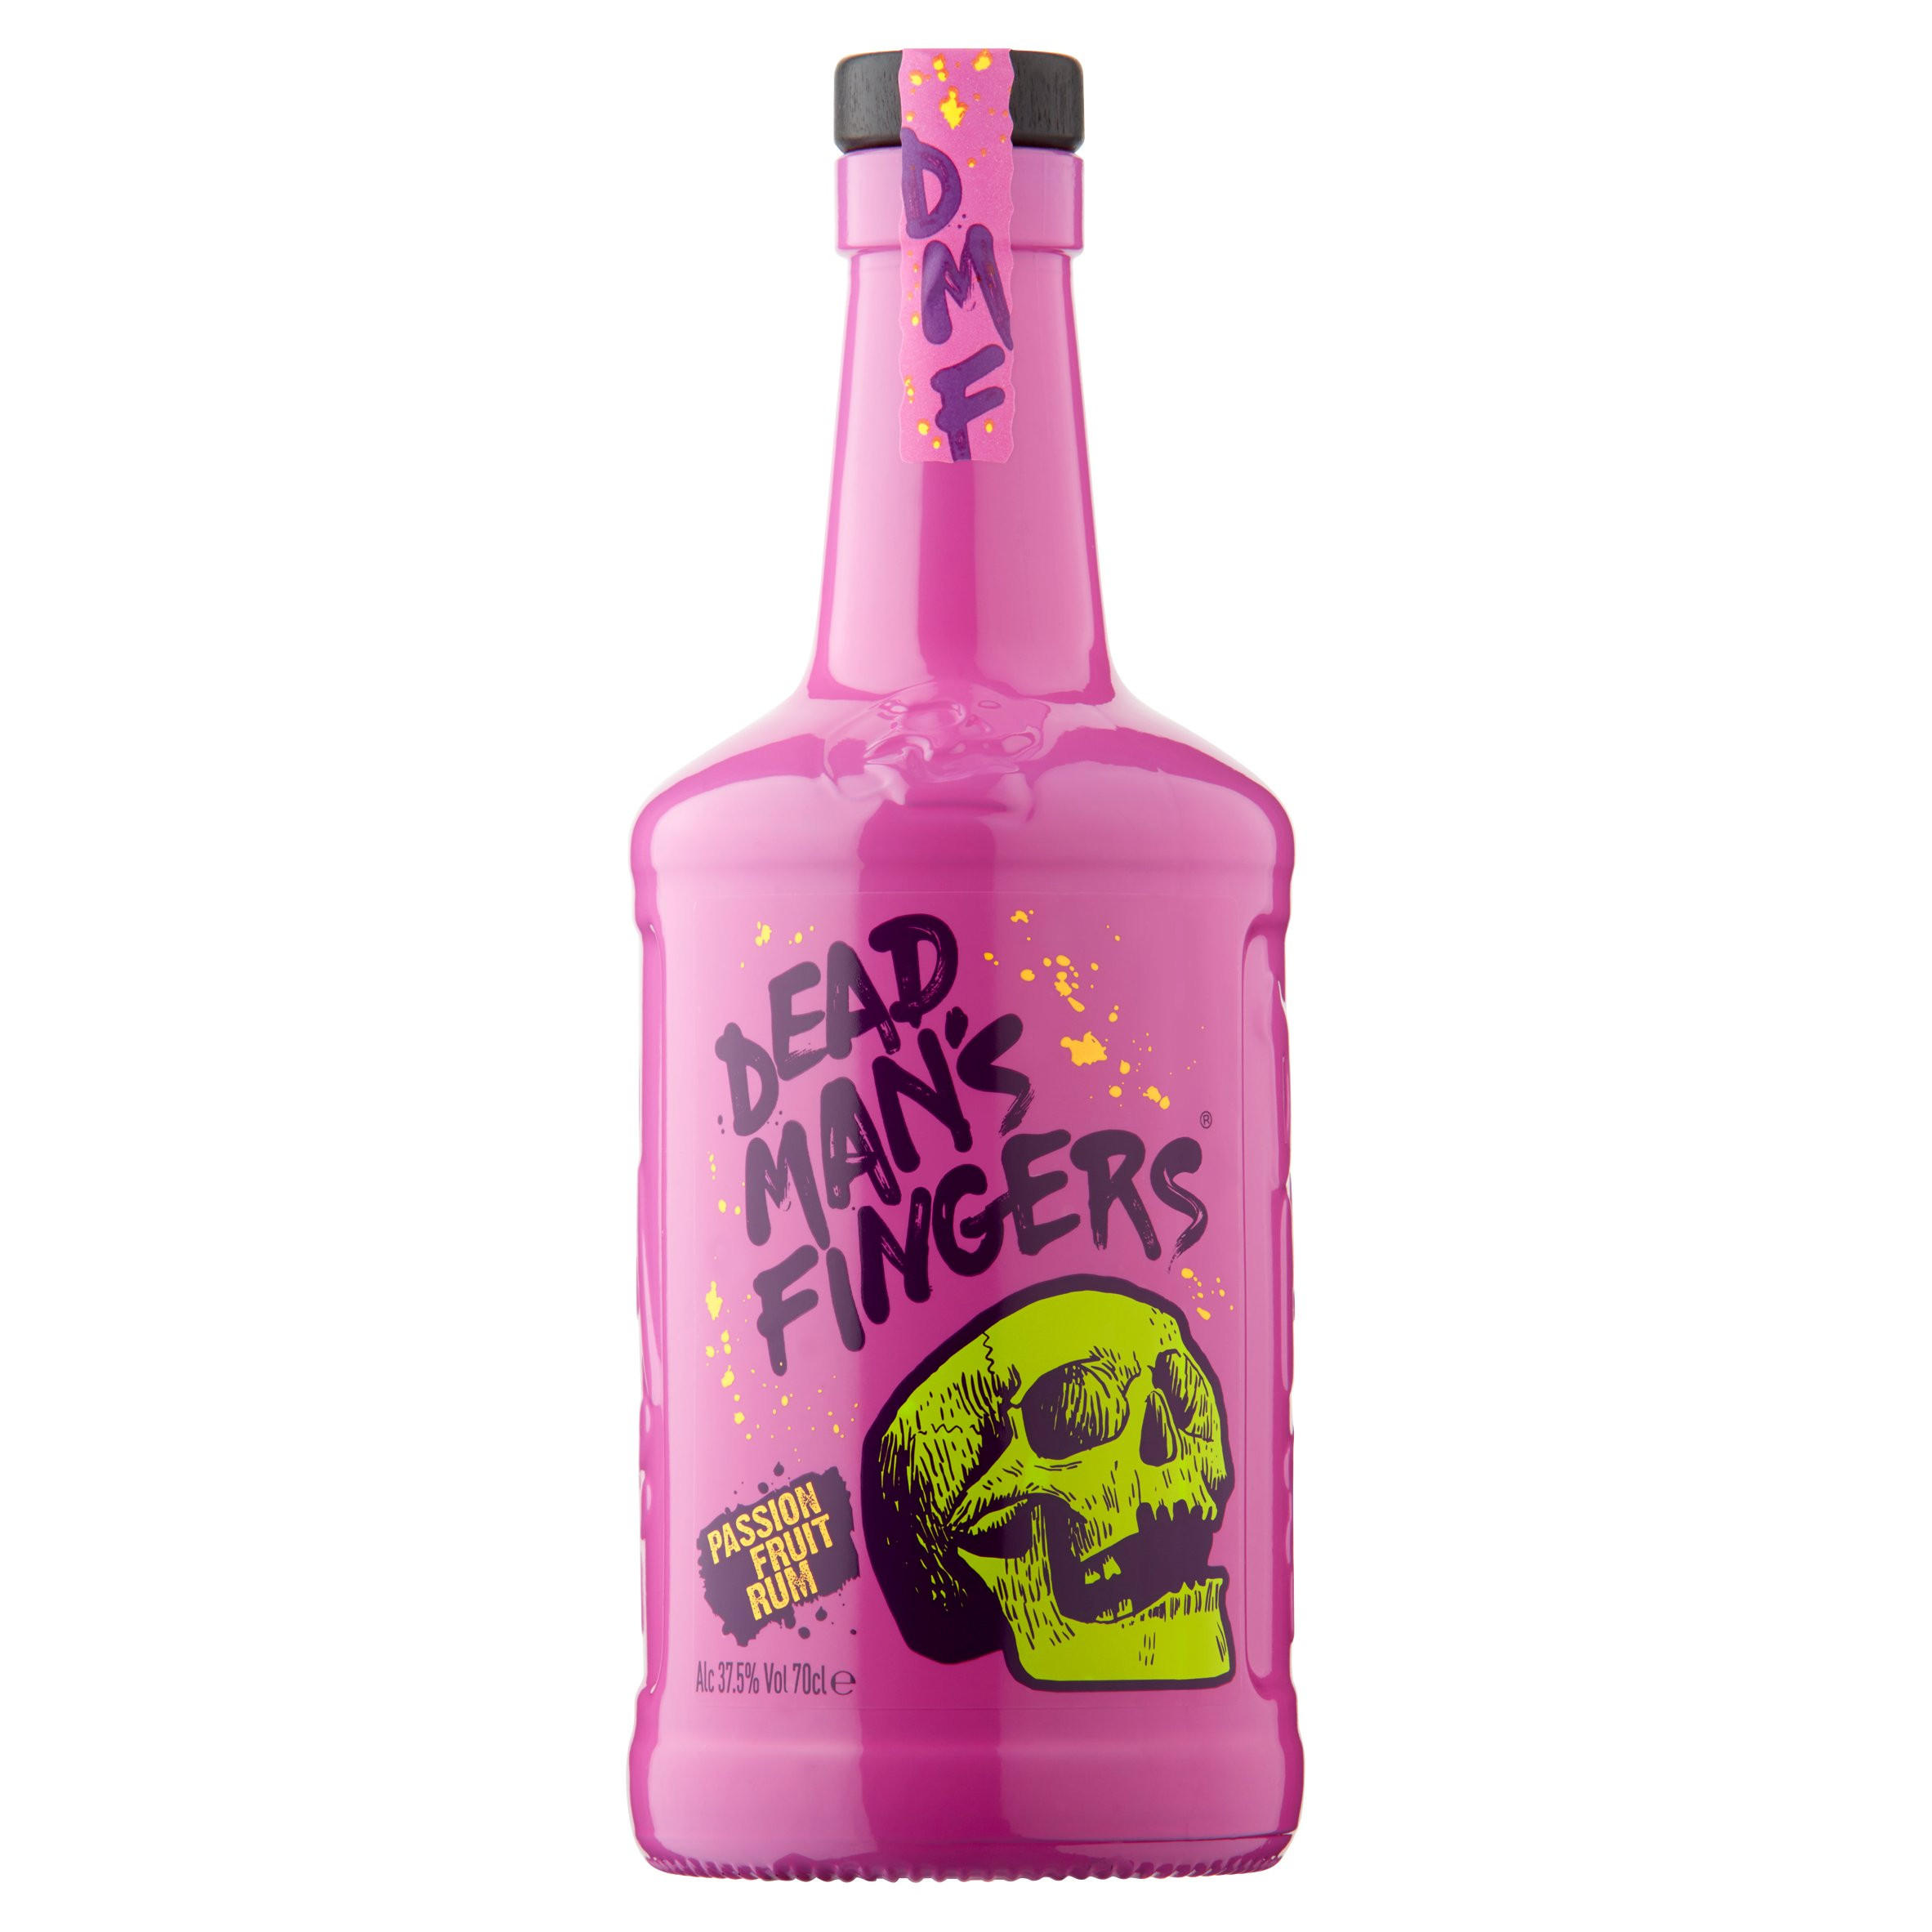 Dead Mans Fingers Passion Fruit Rum 70cl Spirits And Pre Mixed Iceland Foods